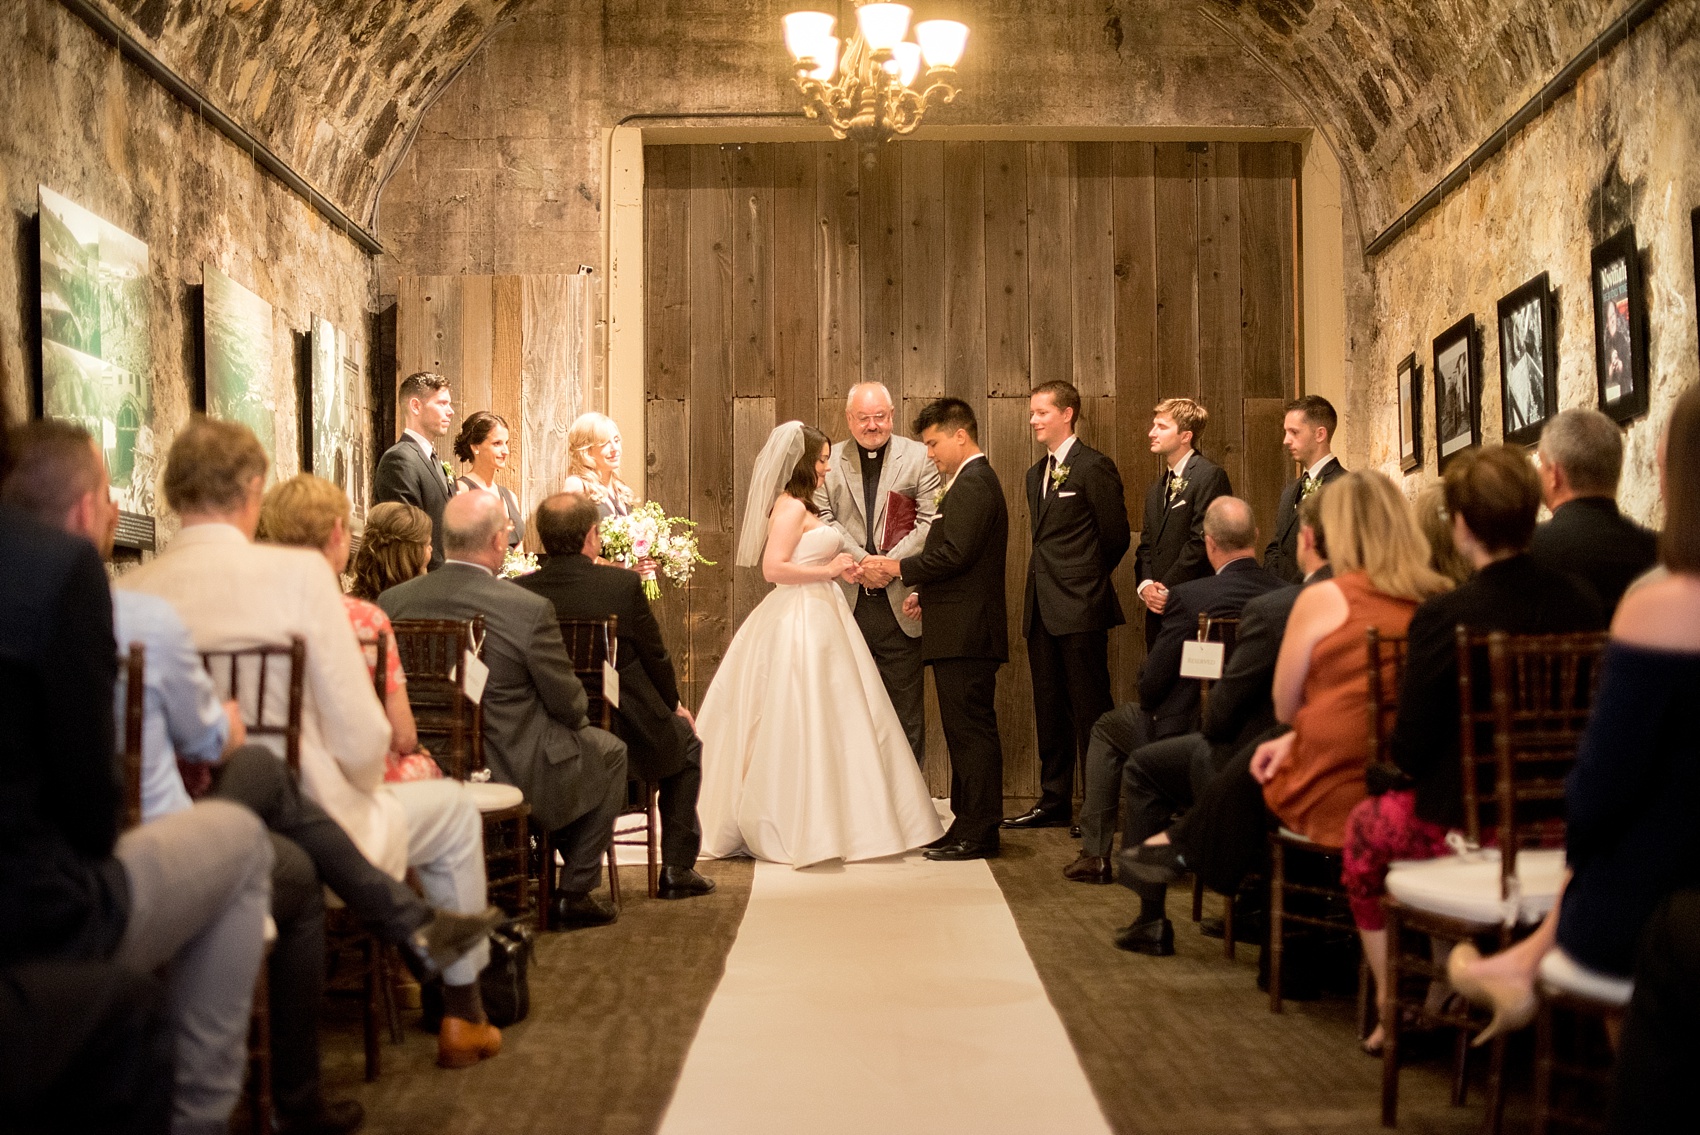 Mikkel Paige Photography ceremony photo at a Testarossa Winery wedding in Los Gatos, California.